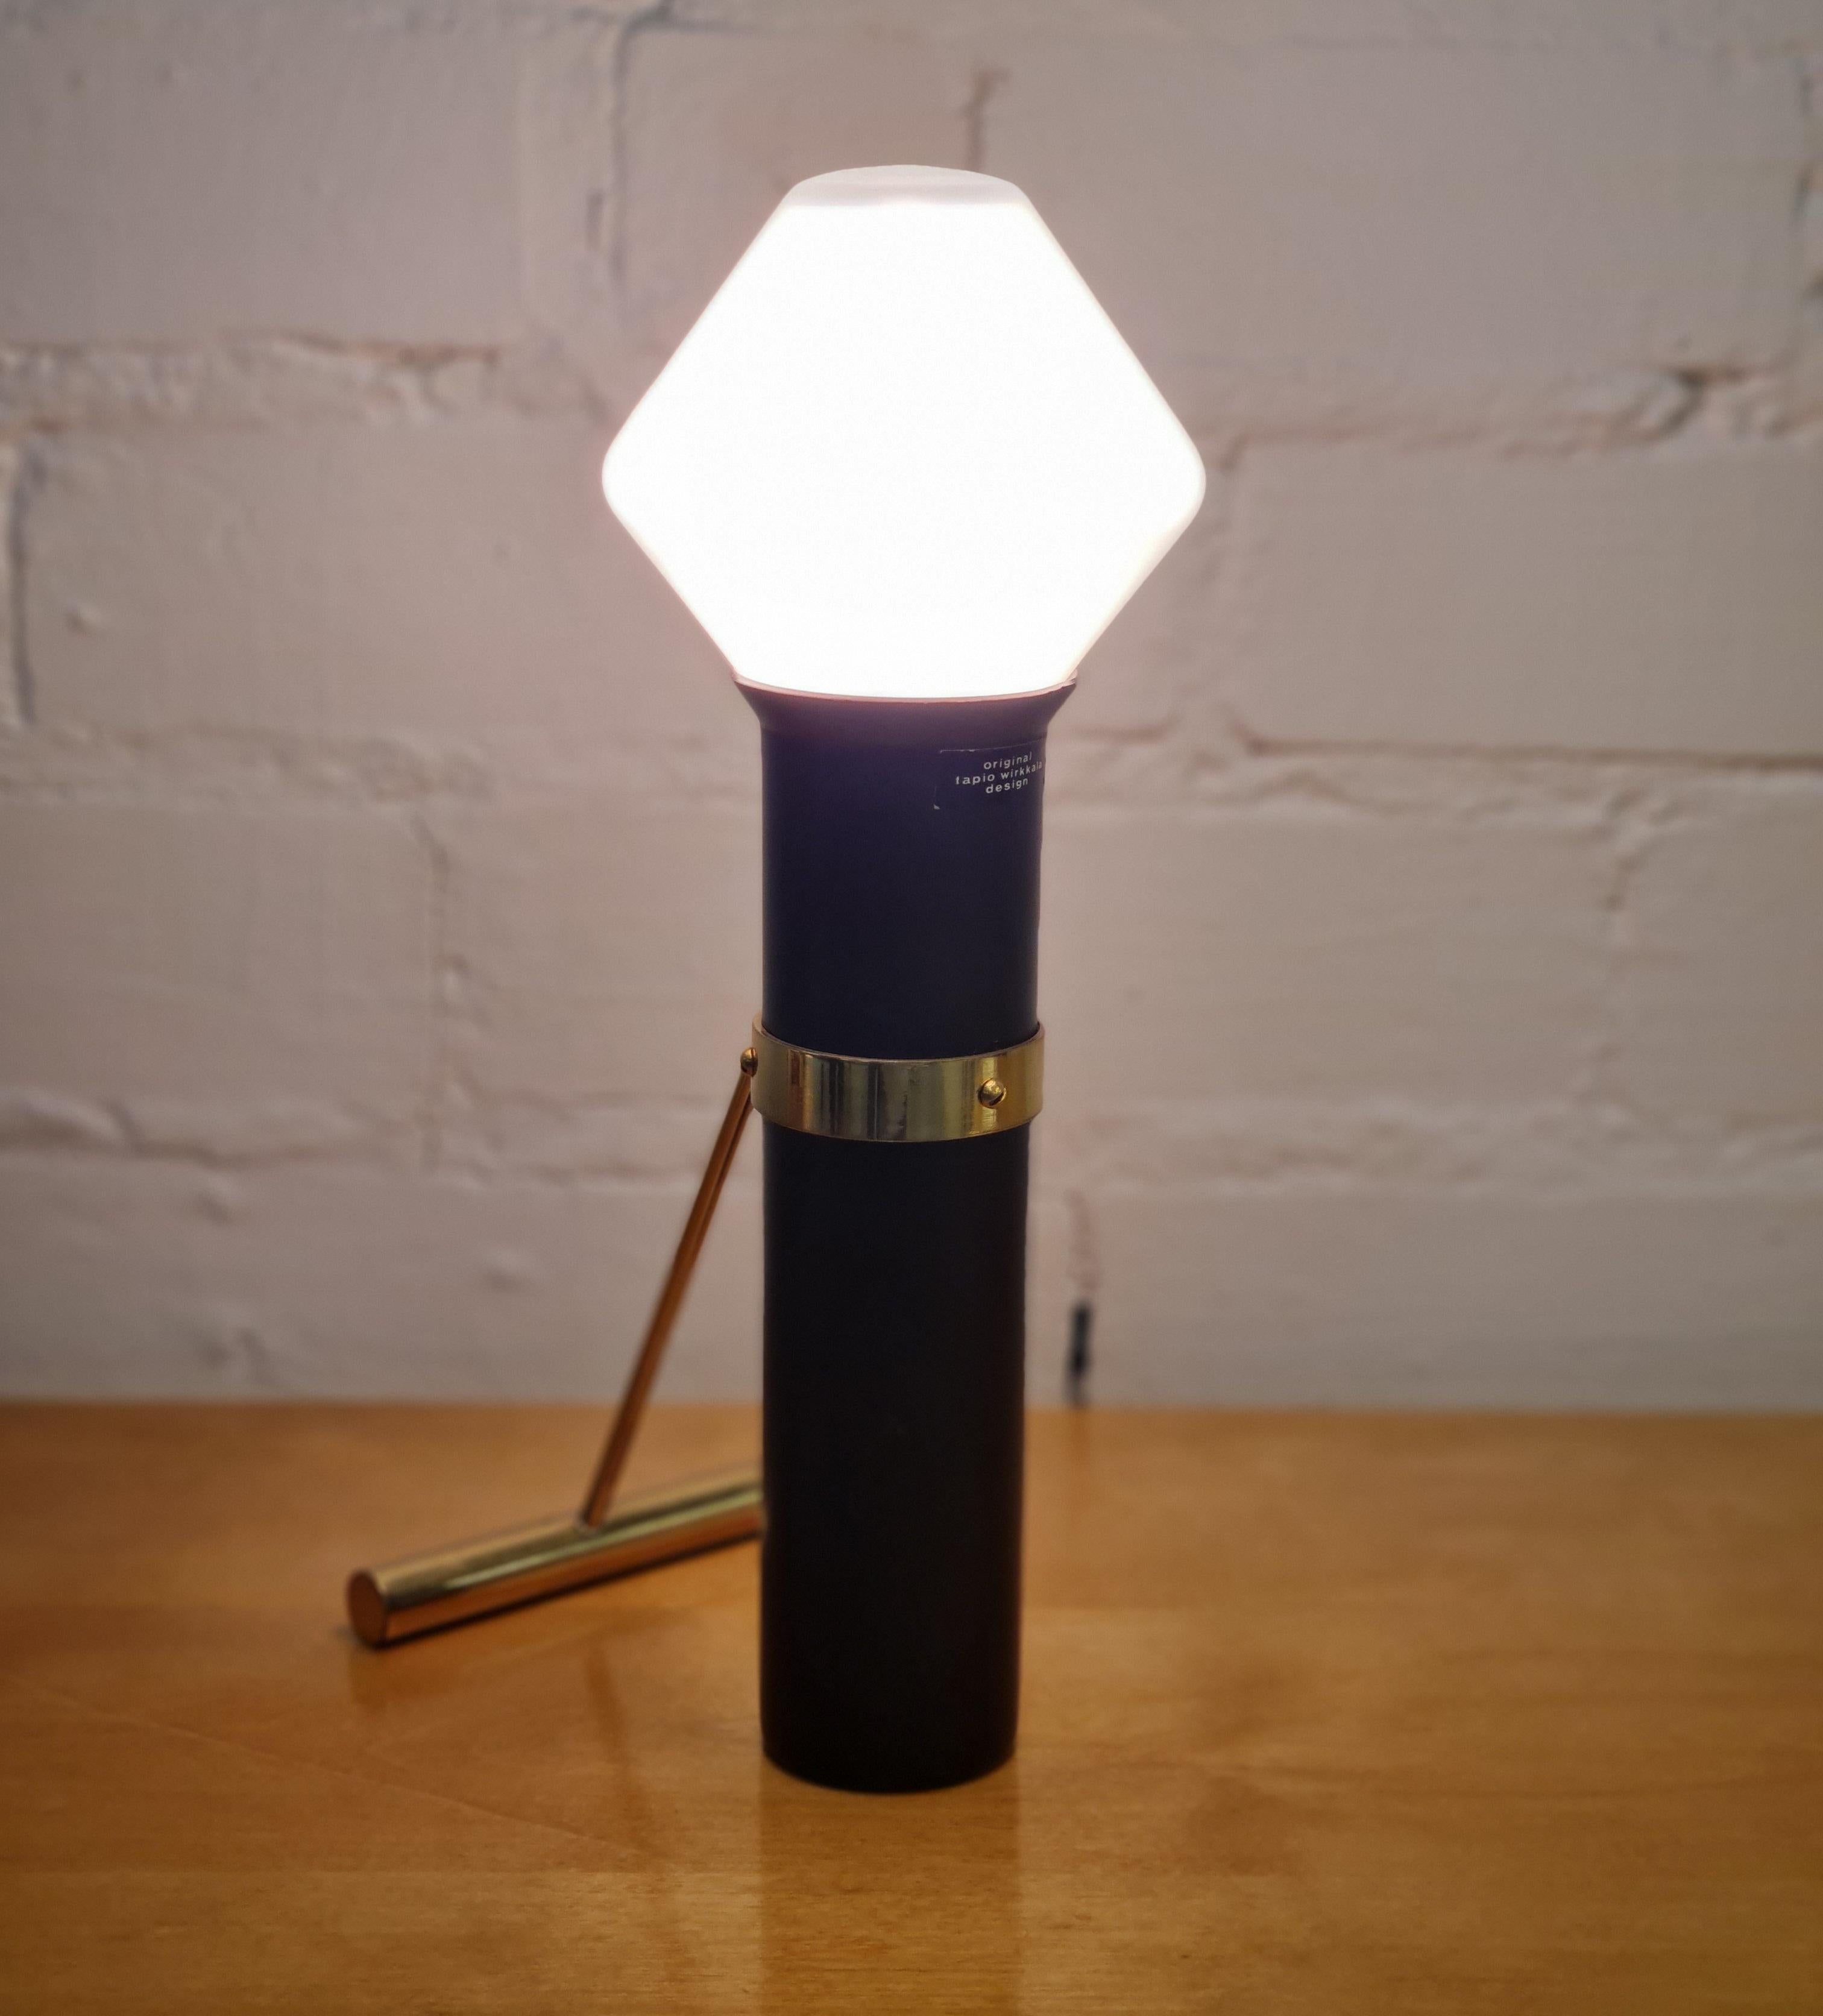 This very rare and elegant table lamp model K11-81 b designed by Tapio Wirkkala, is extremely hard to come by, wich makes this piece a great addition to any collection. It objectifies Wirkkala's superb understanding of geometry and his talent in